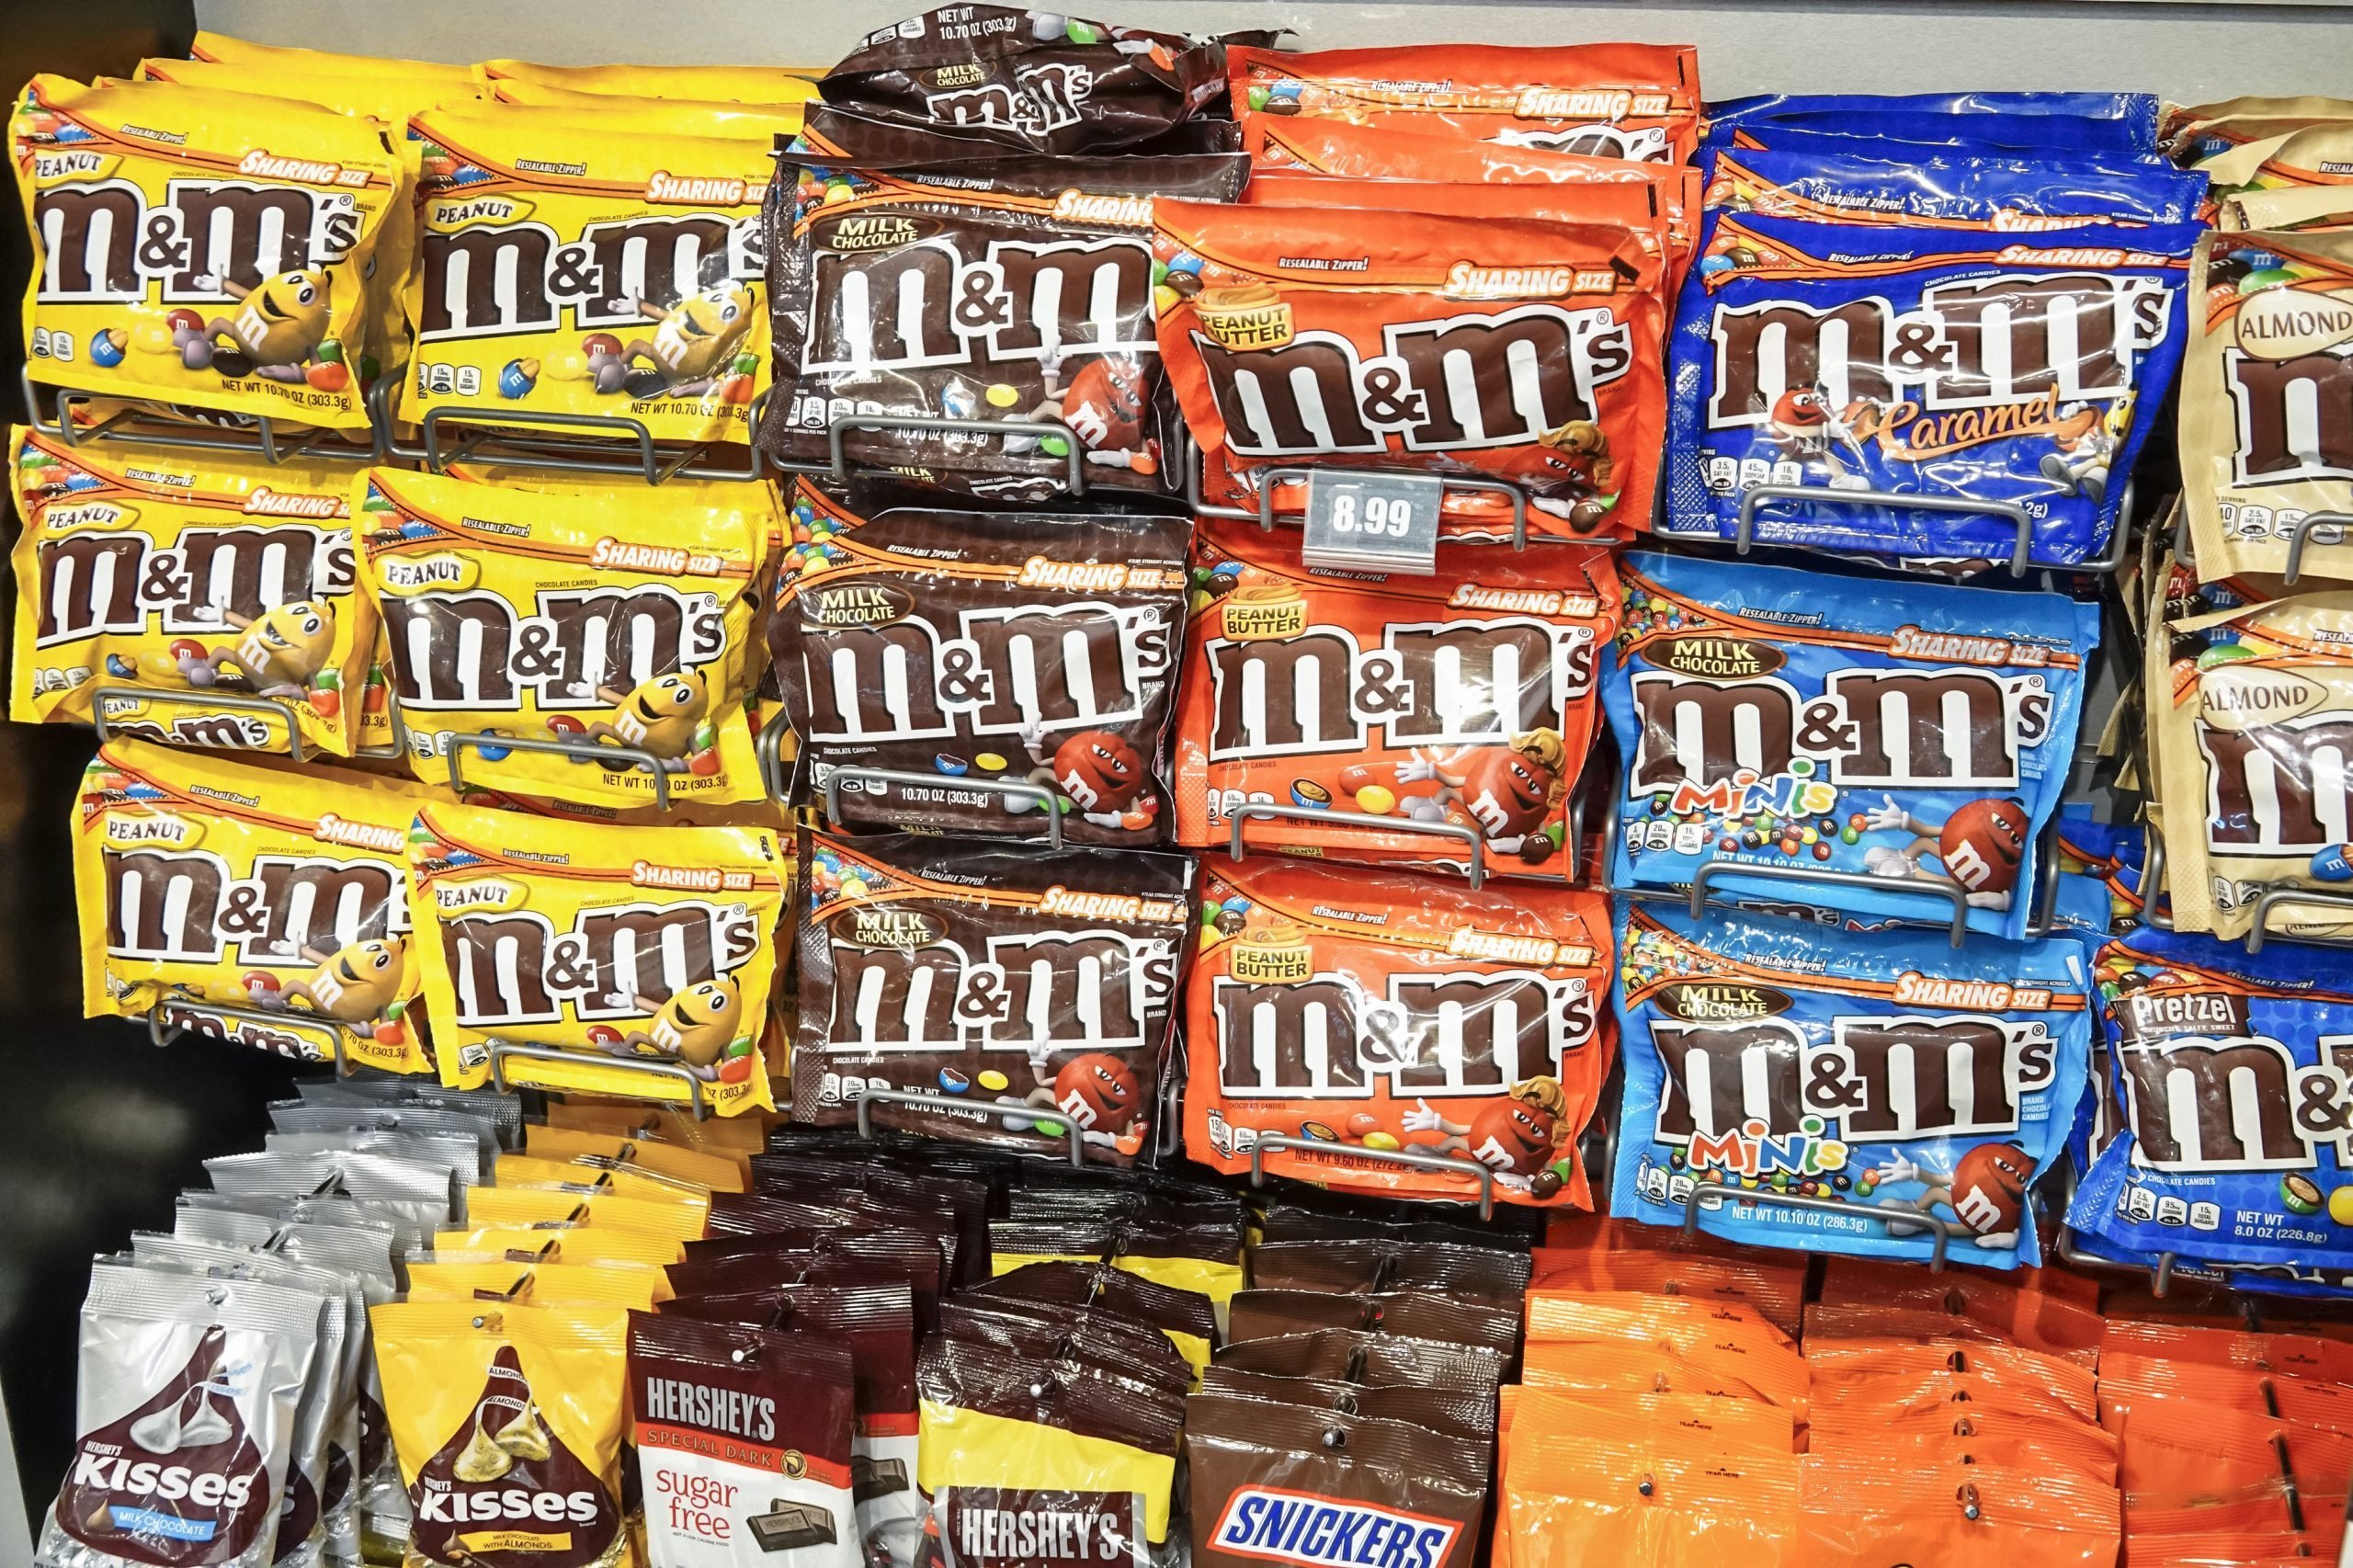 M&M's Caramel Cold Brew will be permanent addition to flavor lineup